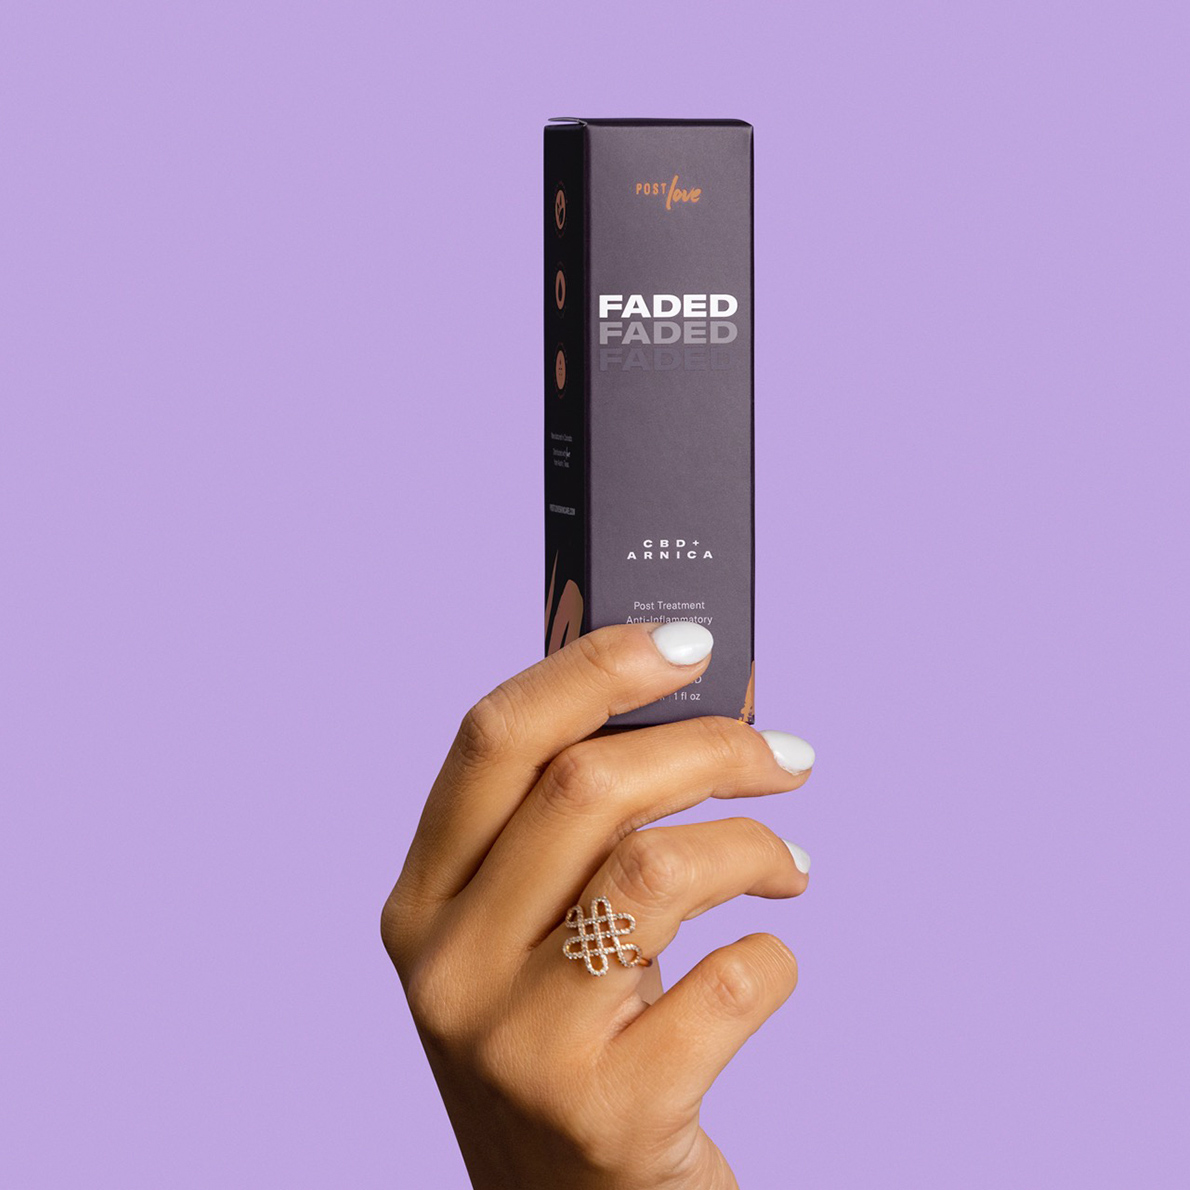 Faded 30 ML packaging by Post Love